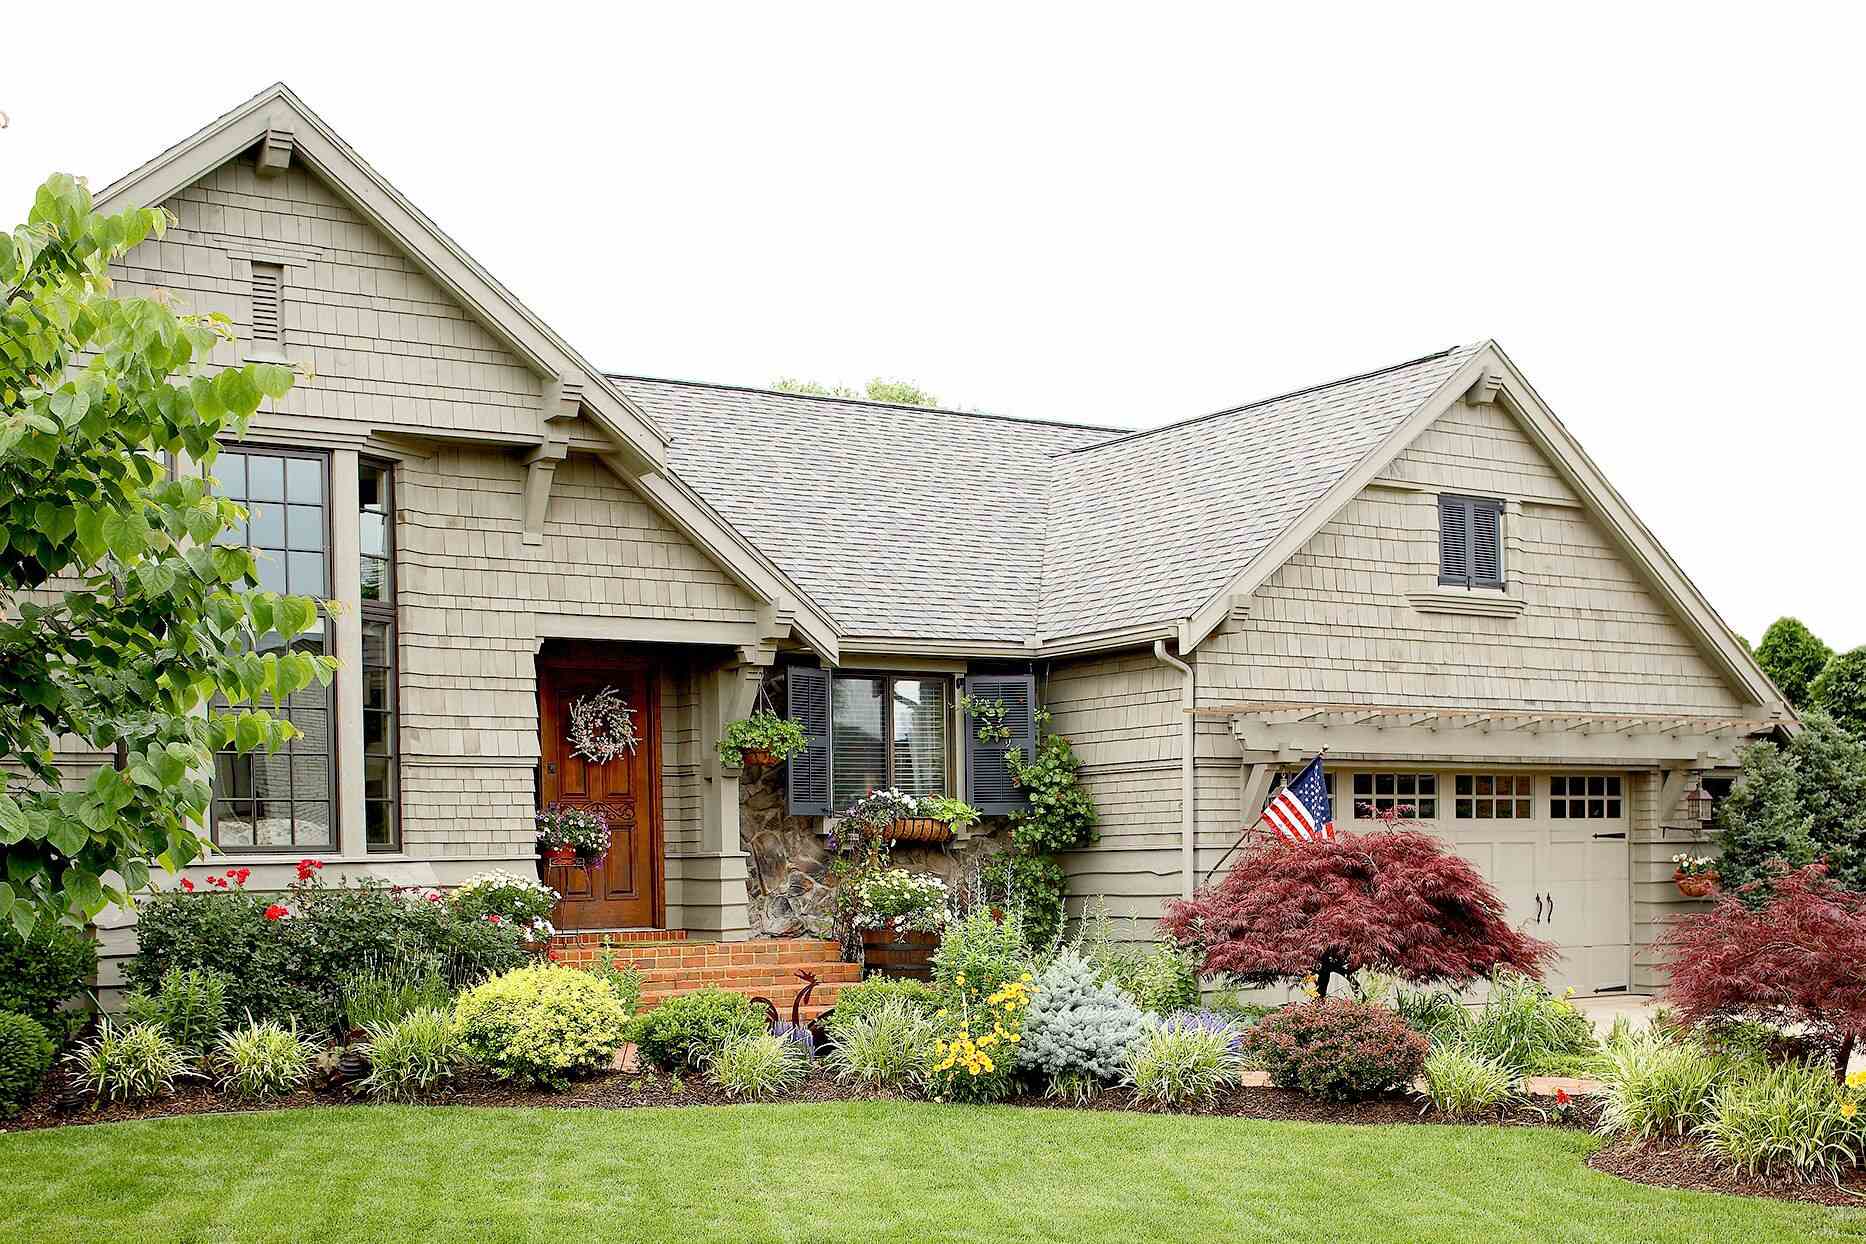 How To Improve Curb Appeal With Landscaping